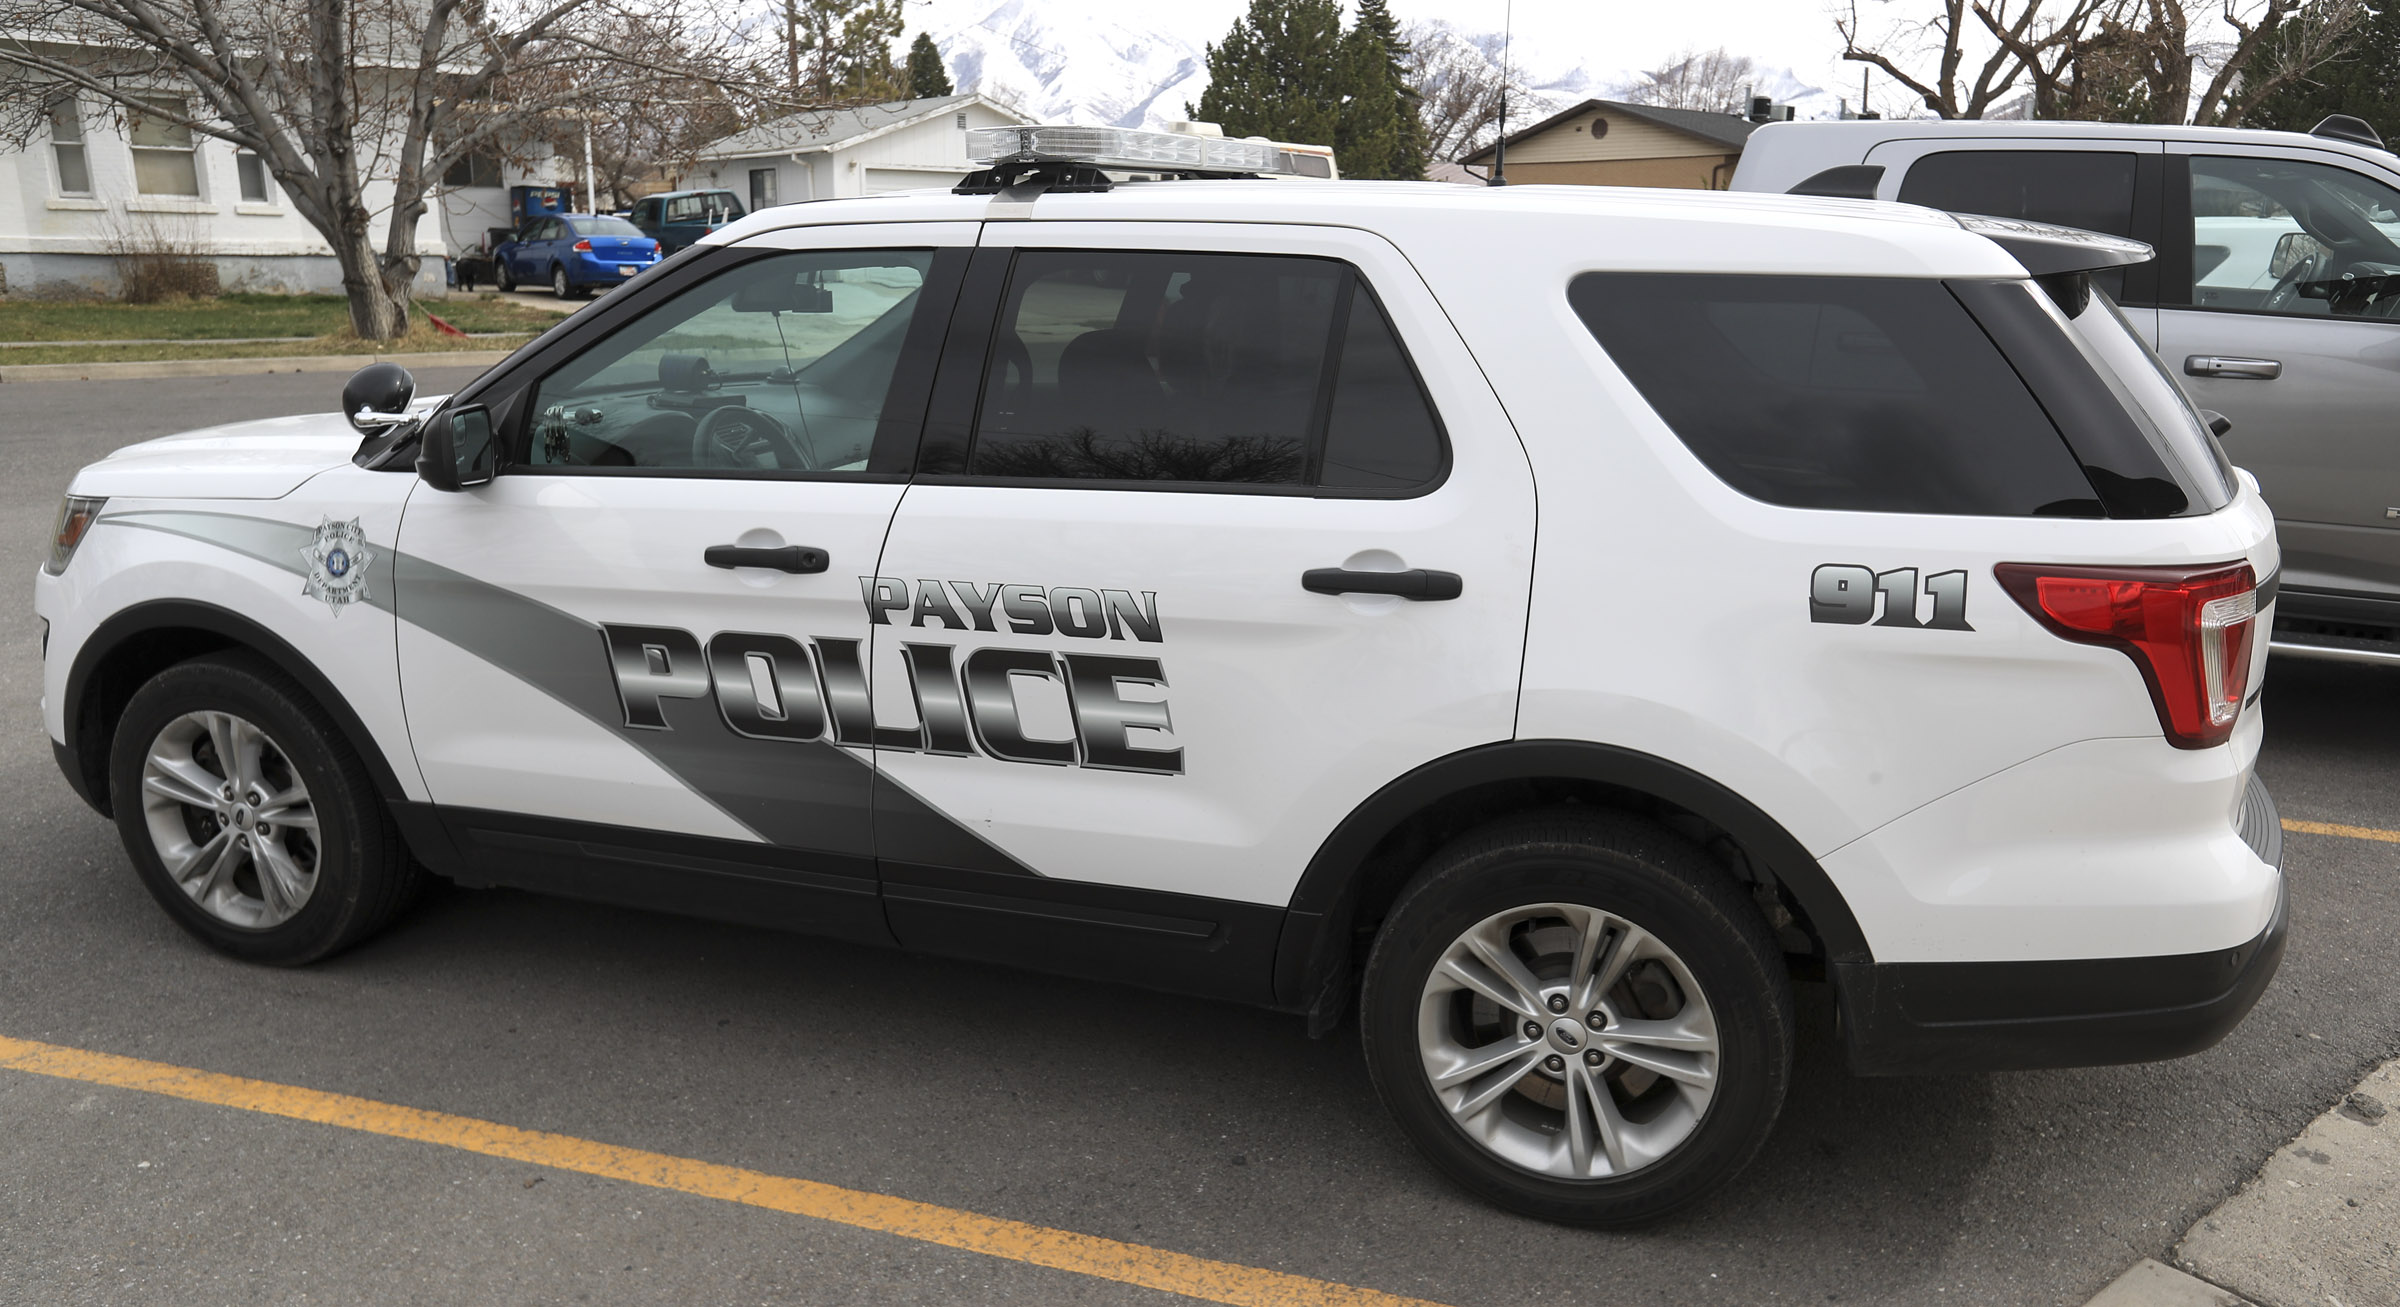 A Payson police vehicle is pictured on Monday, March 22, 2021. Payson Police say a dispute led to a...